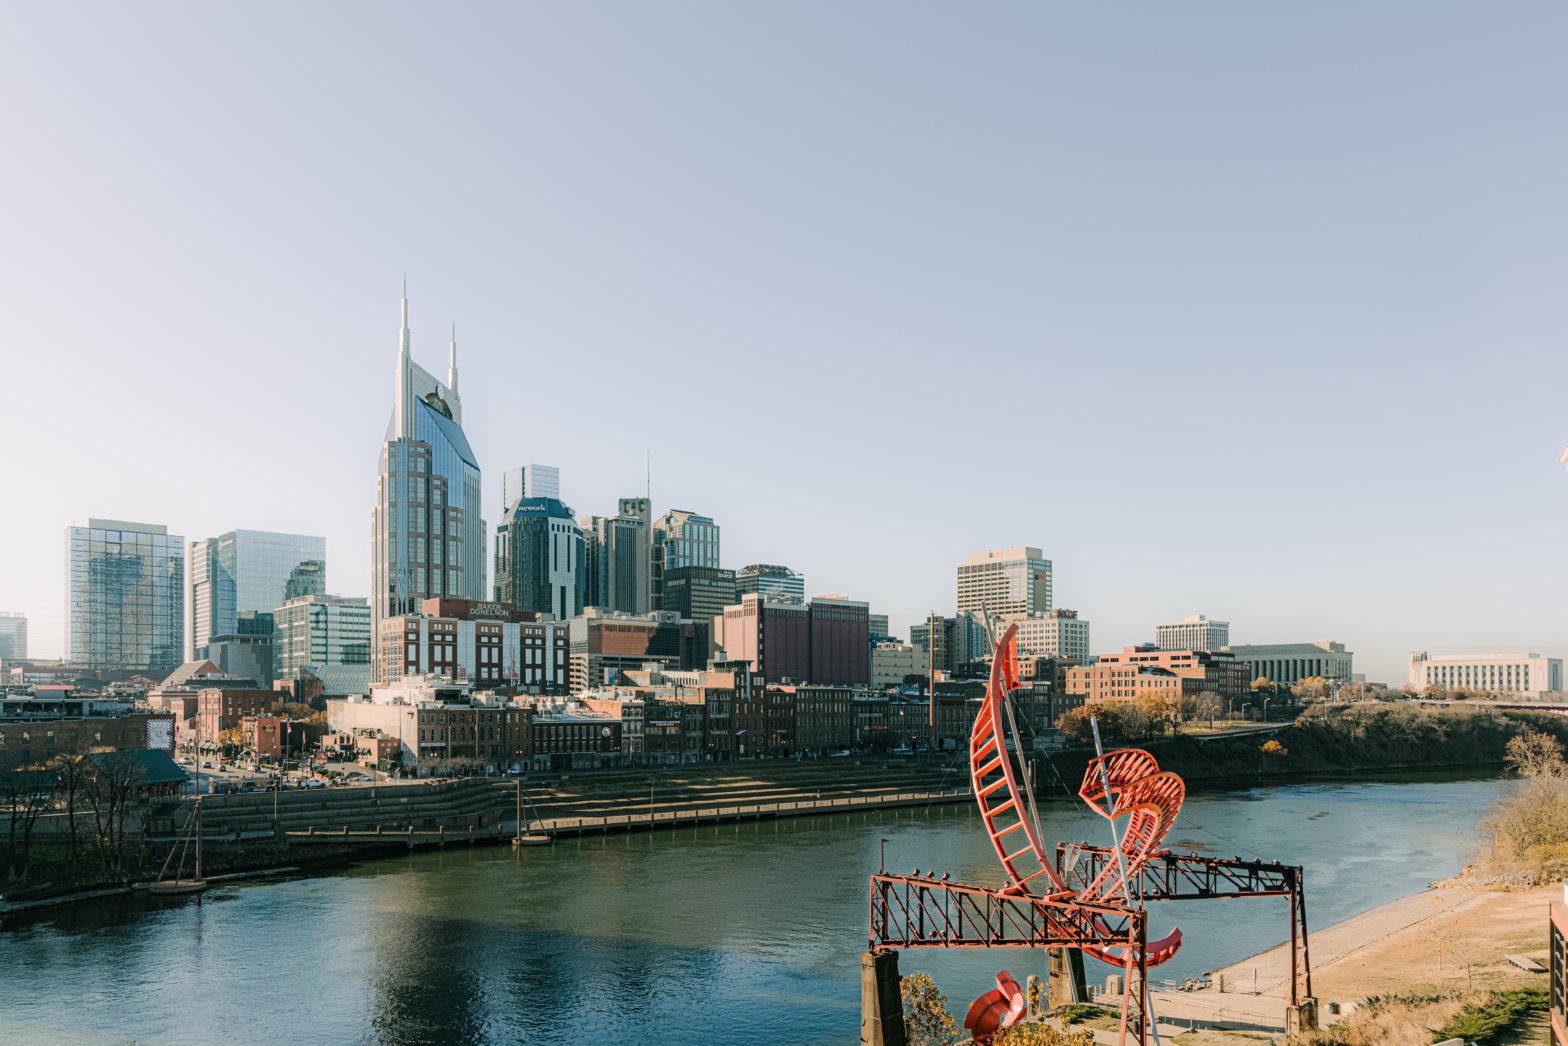 How To Spend One Day in Nashville